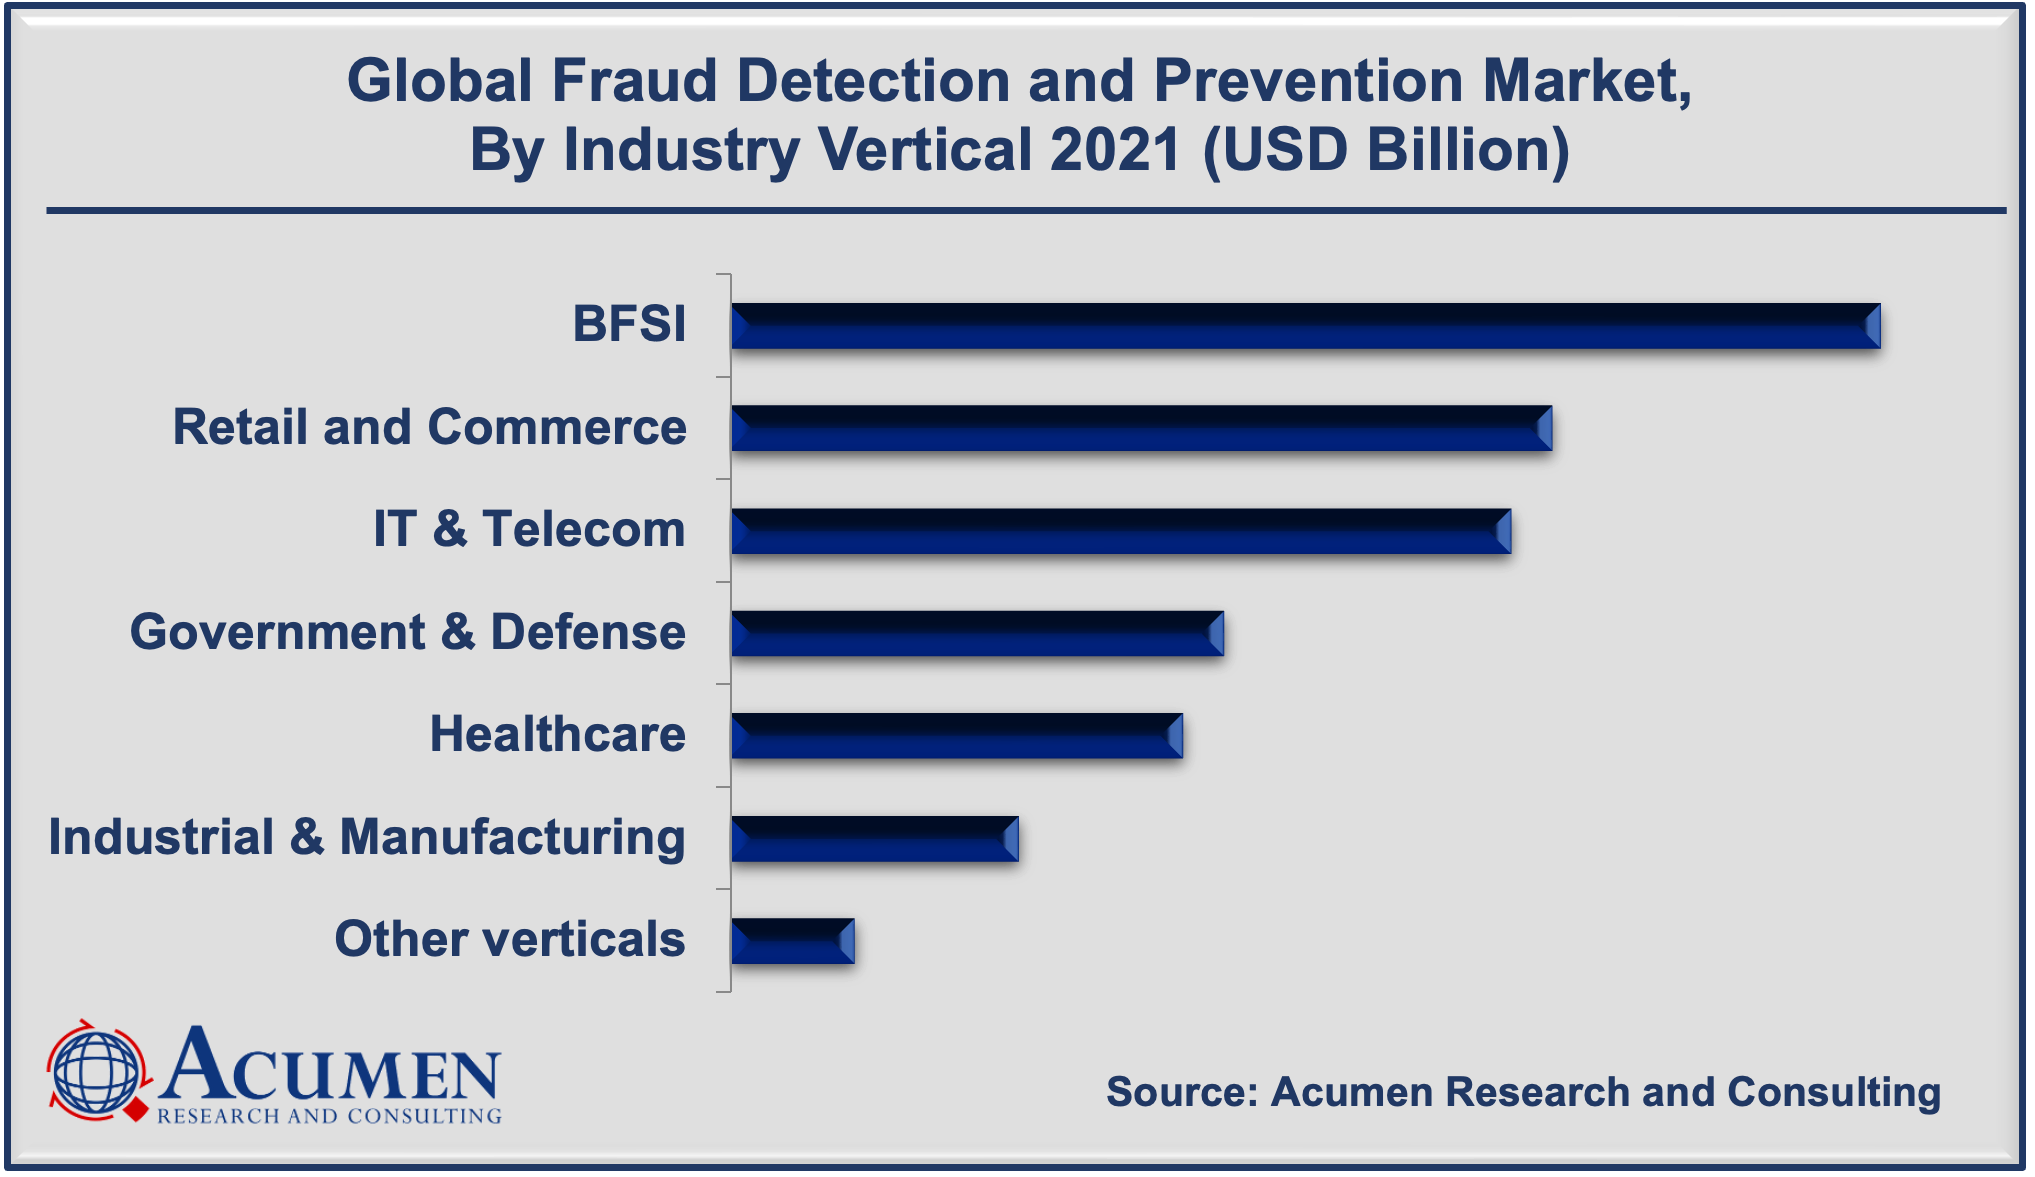 Fraud Detection and Prevention Market Share accounted for USD 27 Billion in 2021 and is projected to reach USD 176 Billion by 2030, with a significant CAGR of 23.4% from 2022 to 2030.